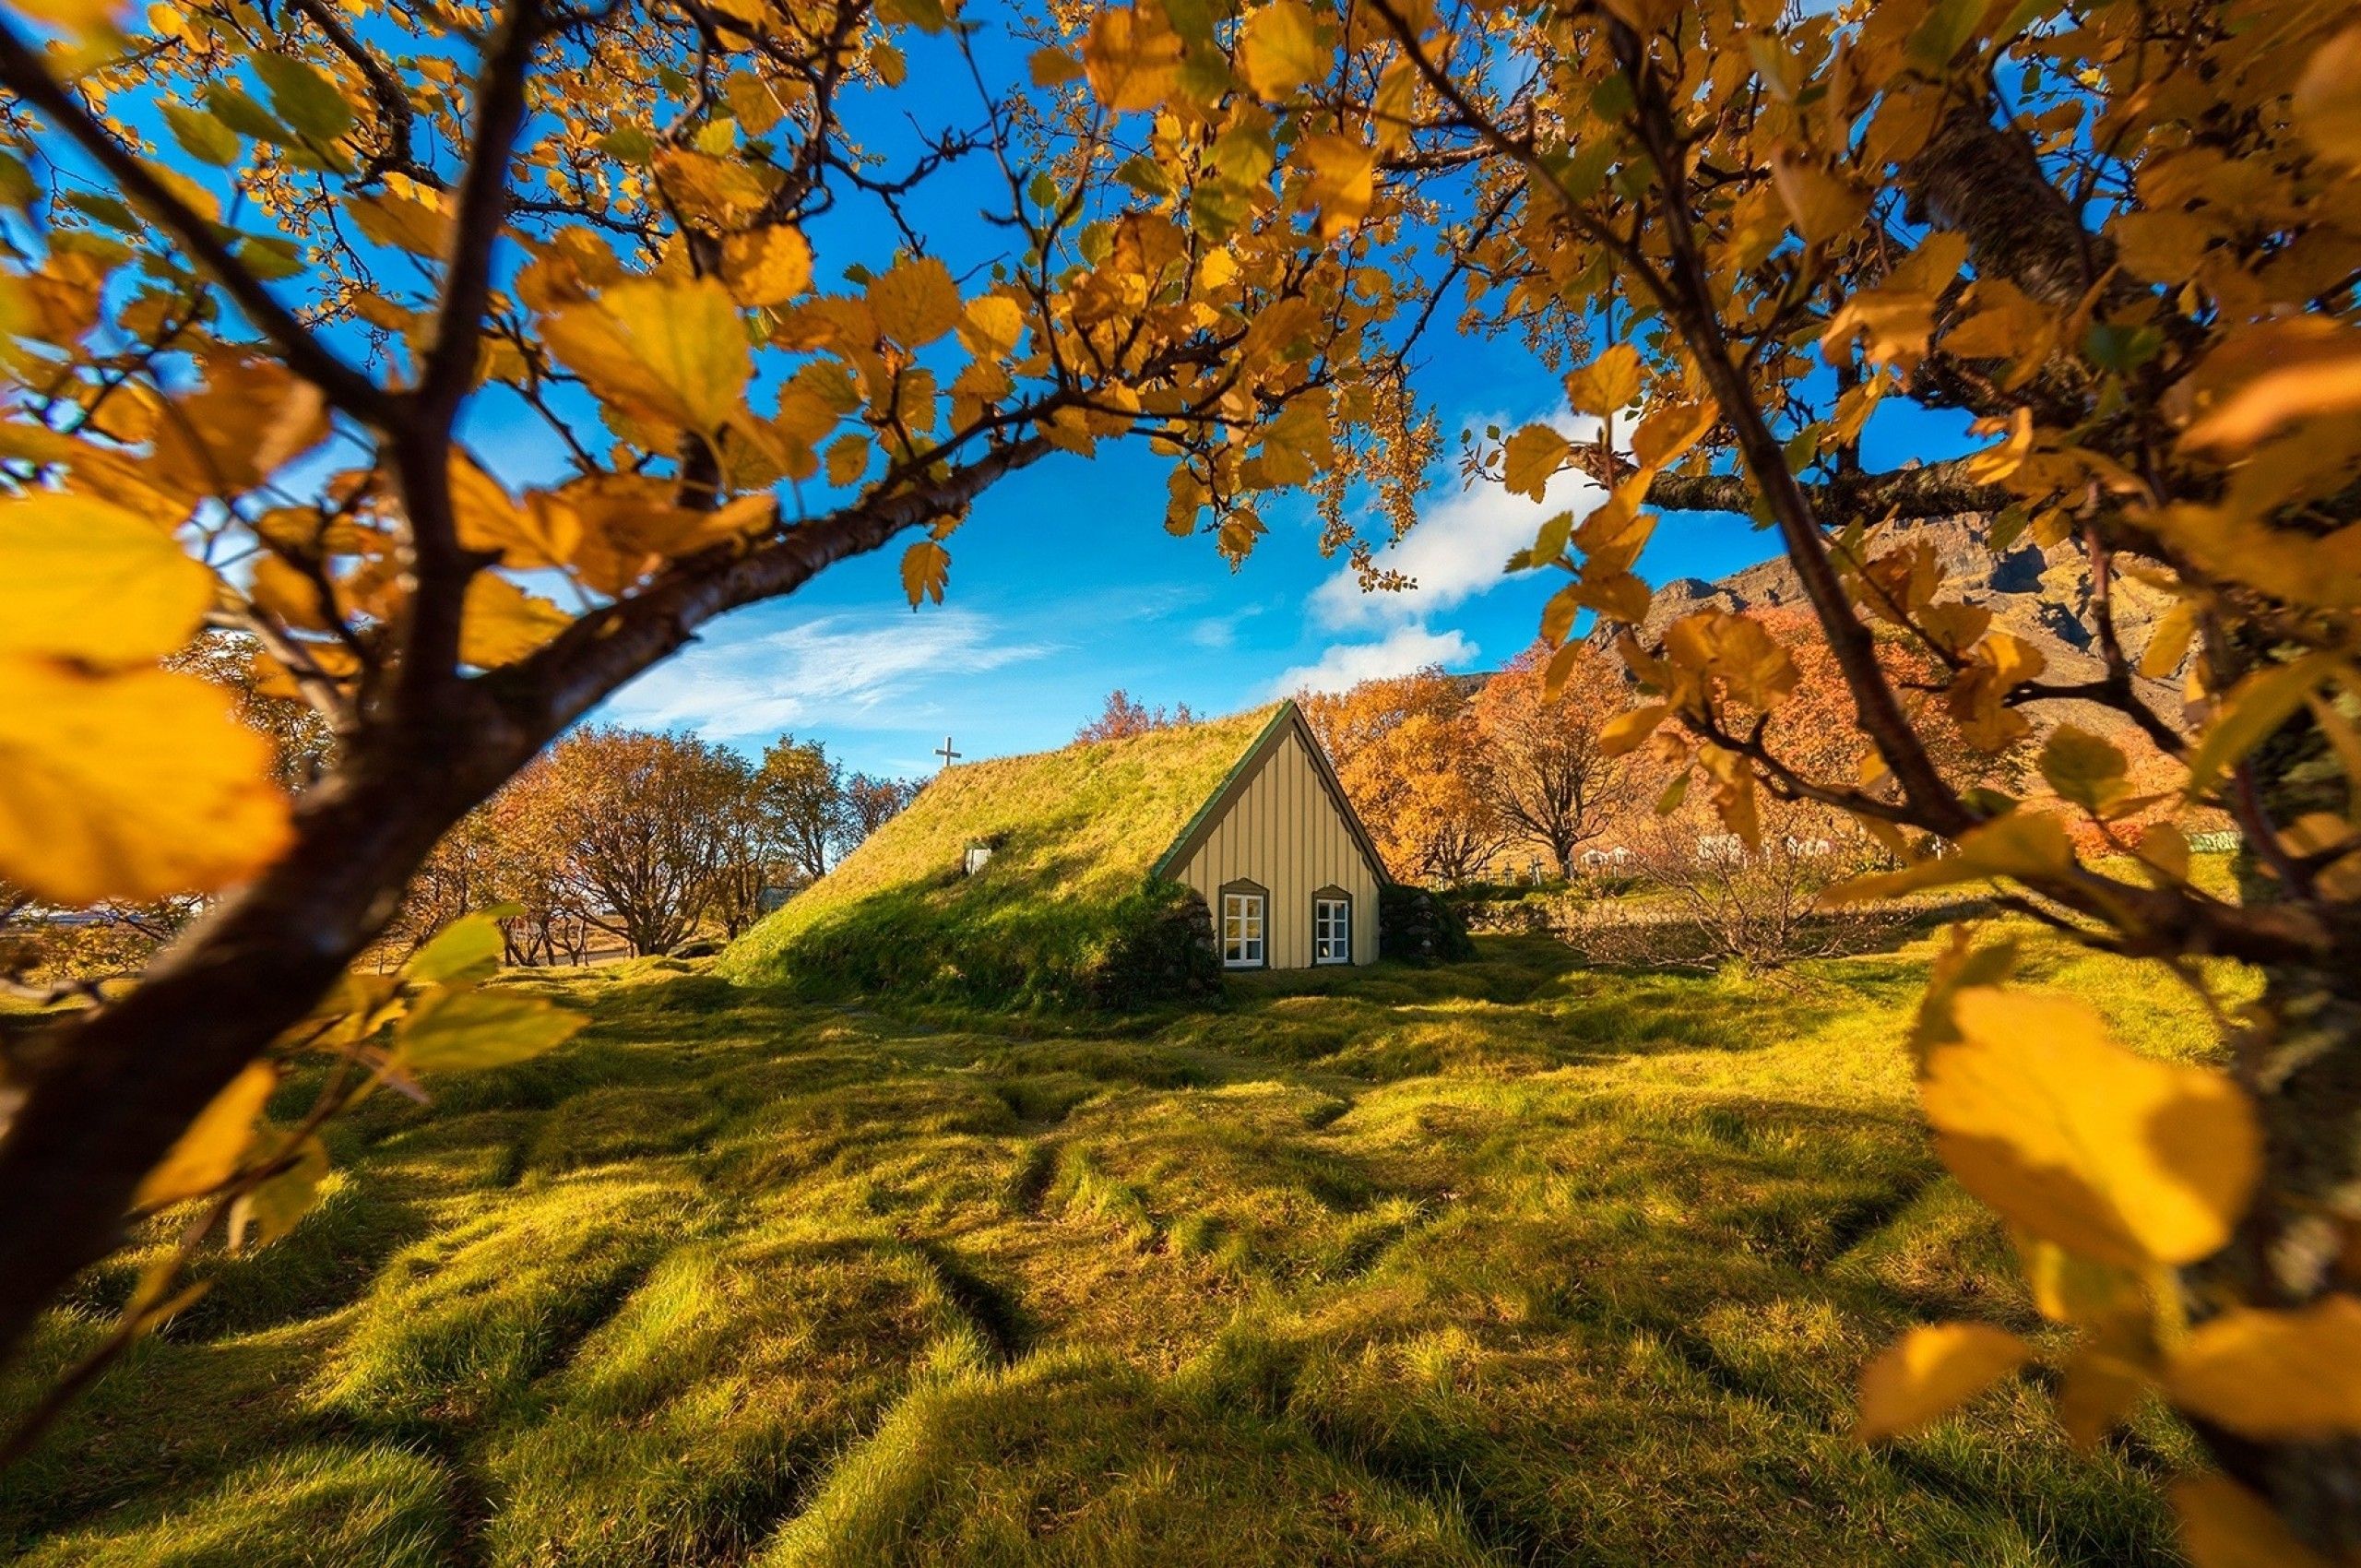 Download 2560x1700 Iceland, Church, Autumn, Fall, Leaves, Field Wallpaper for Chromebook Pixel